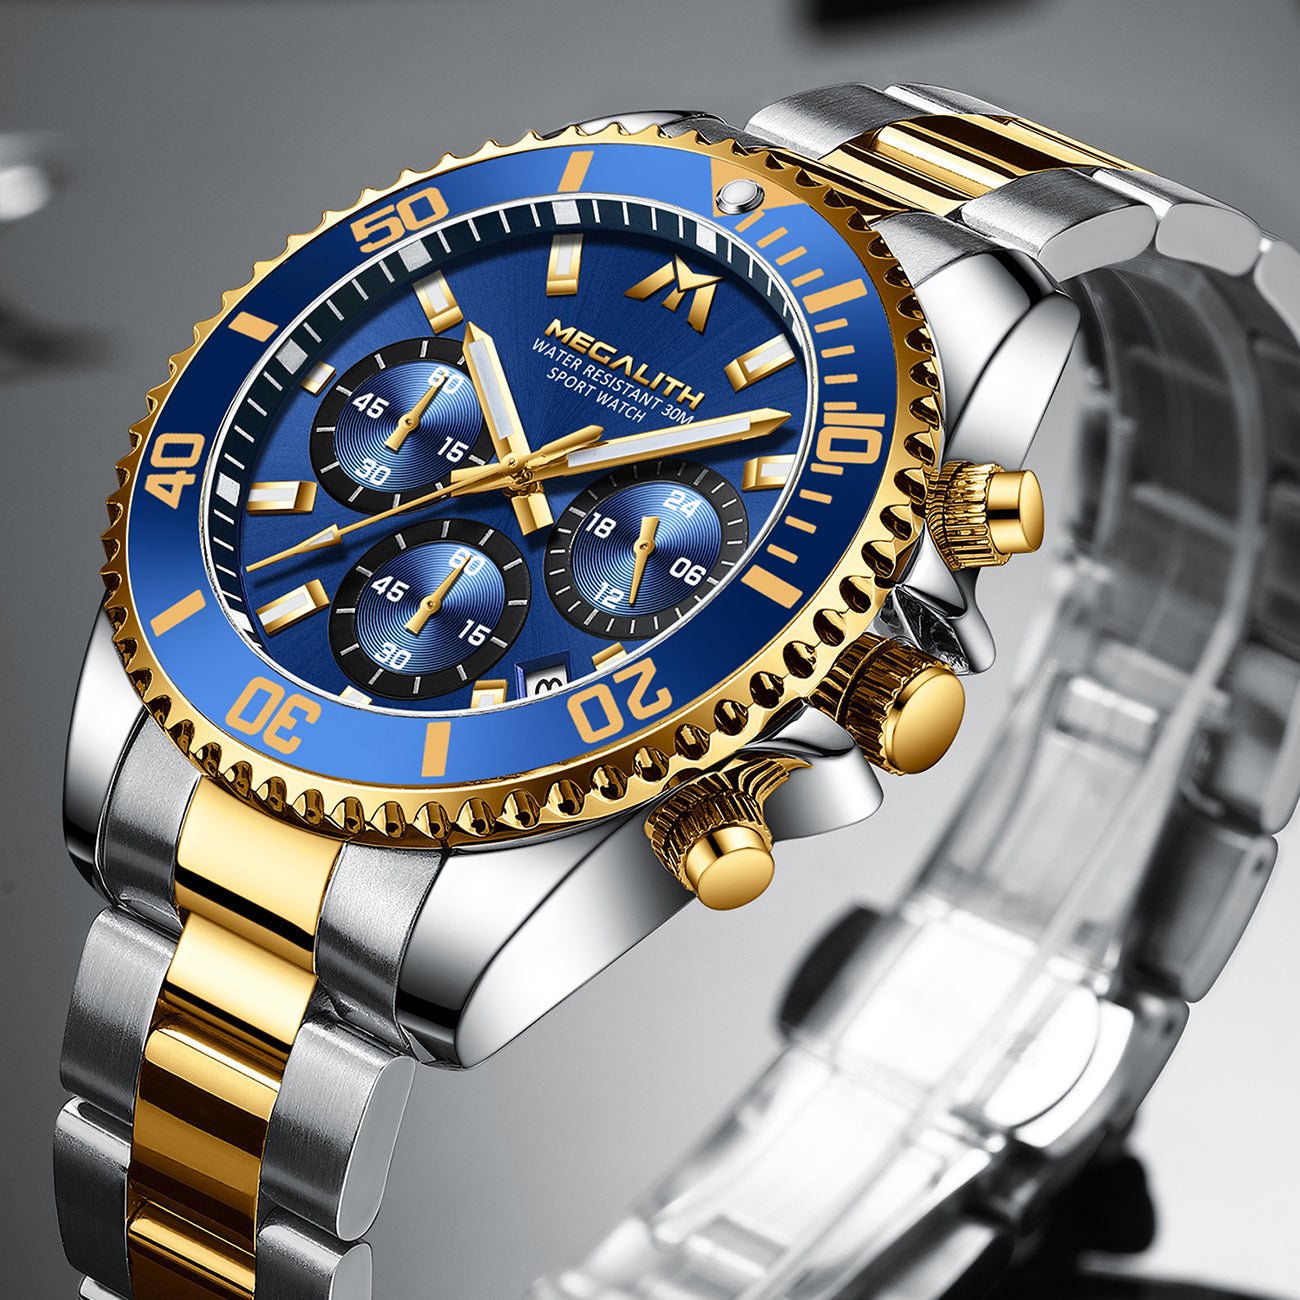 MEGALITH Mens Watches Men Designer Chronograph Blue Gold Waterproof Luminous Stainless Steel Wrist Watch Military Large Date Analogue Watches for Men